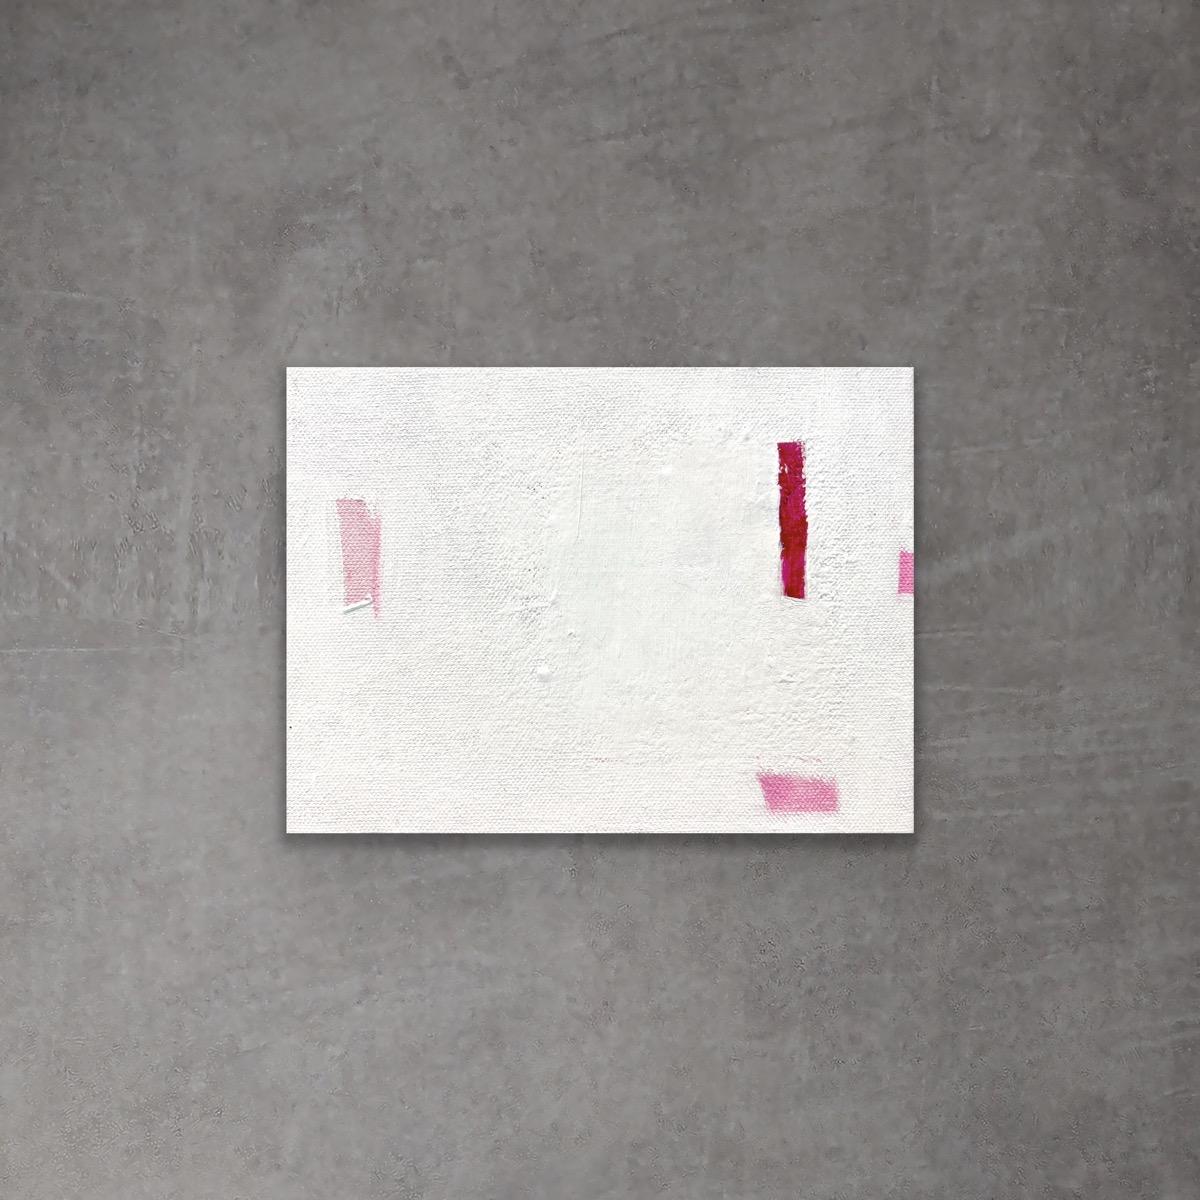 So little with so much to say. This pink and white abstract puts emphasis on simplified composition with the use of paint and oil pastel. Layers of paint build up a rough textured surface. Both intimate and impactful when hung it in the perfect